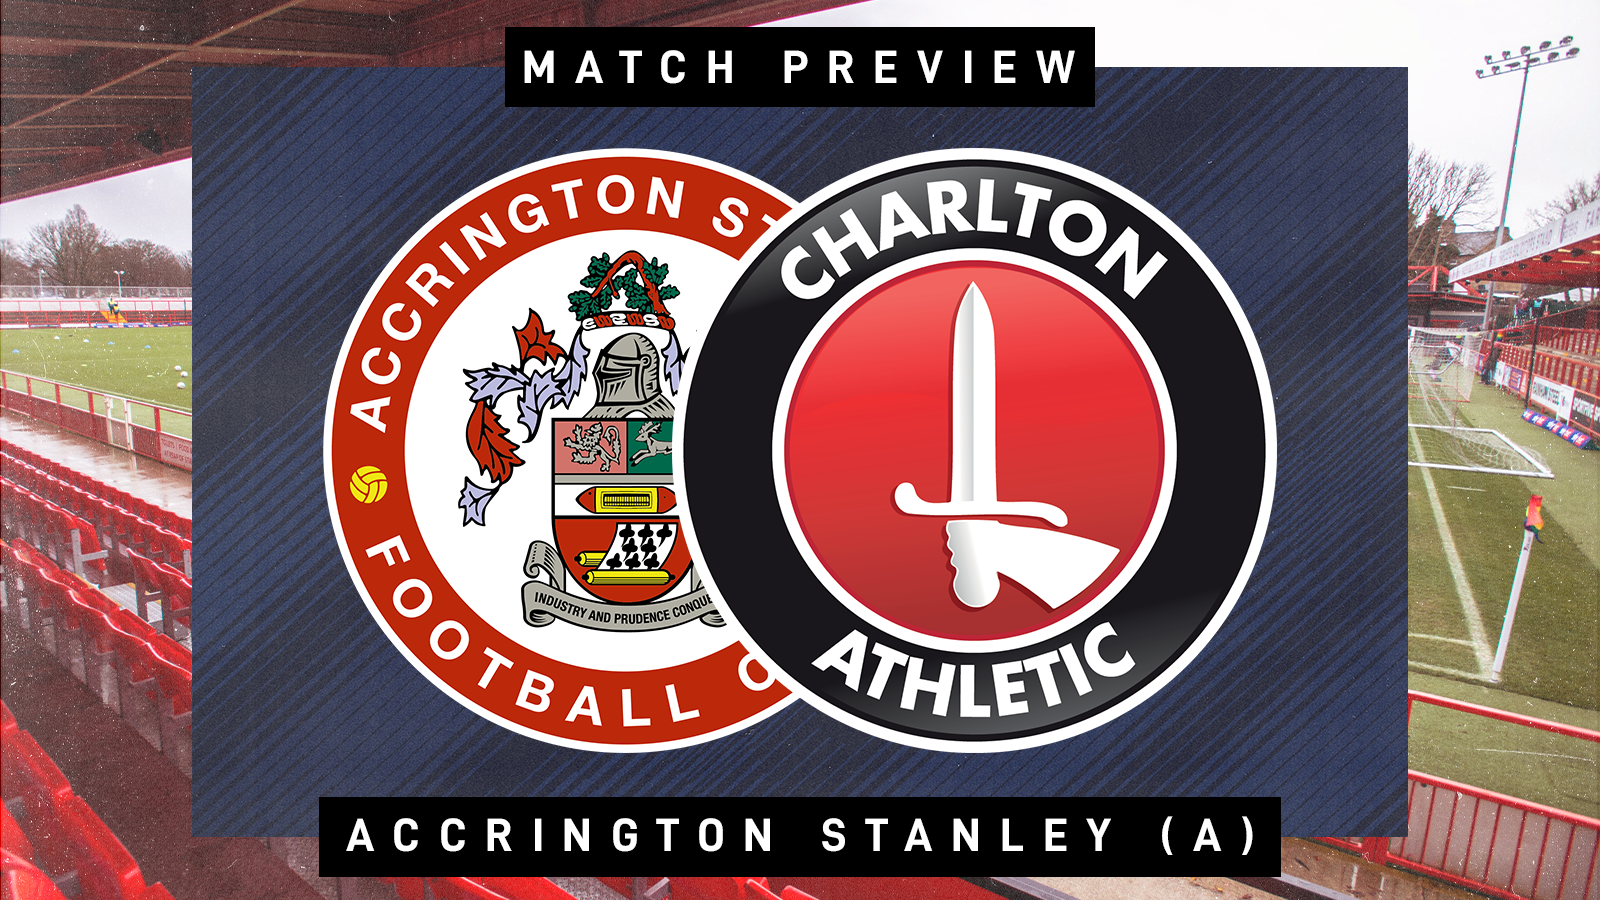 Accrington Stanley (a) match preview graphic